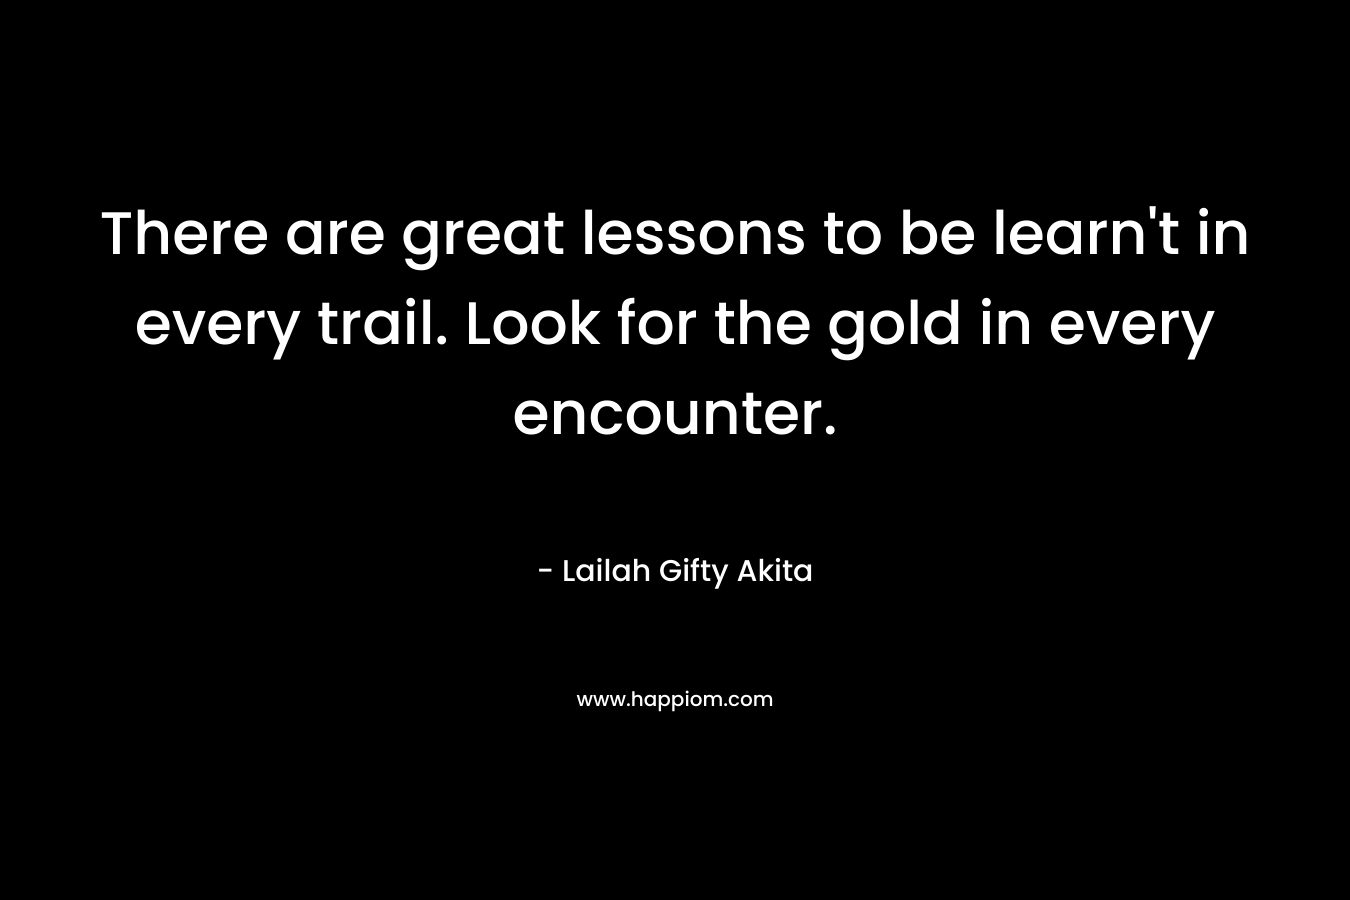 There are great lessons to be learn’t in every trail. Look for the gold in every encounter. – Lailah Gifty Akita